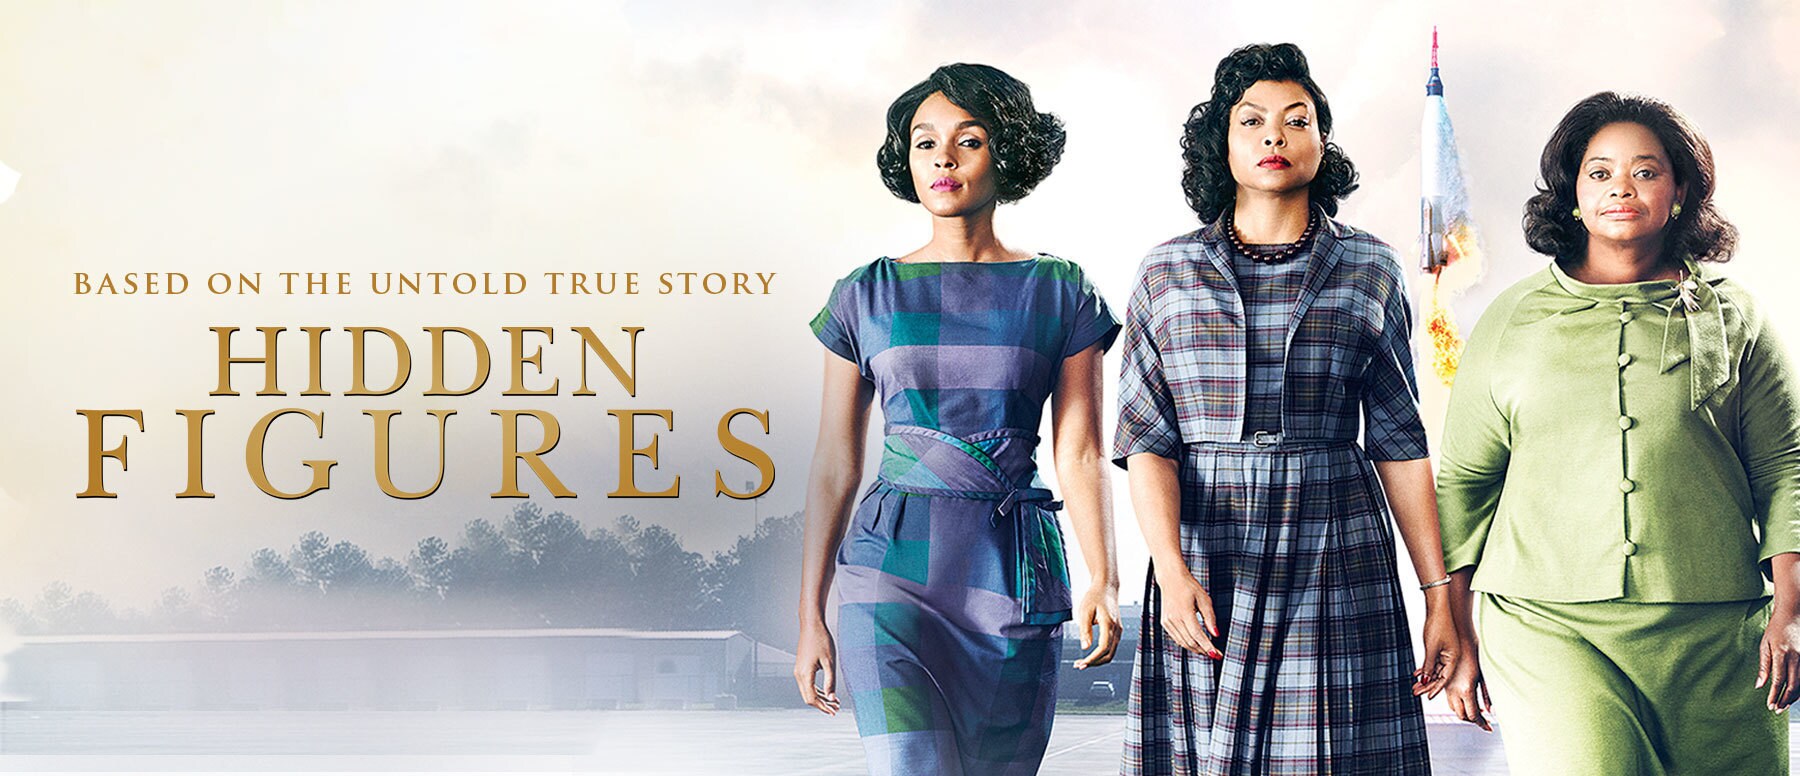 47-facts-about-the-movie-hidden-figures